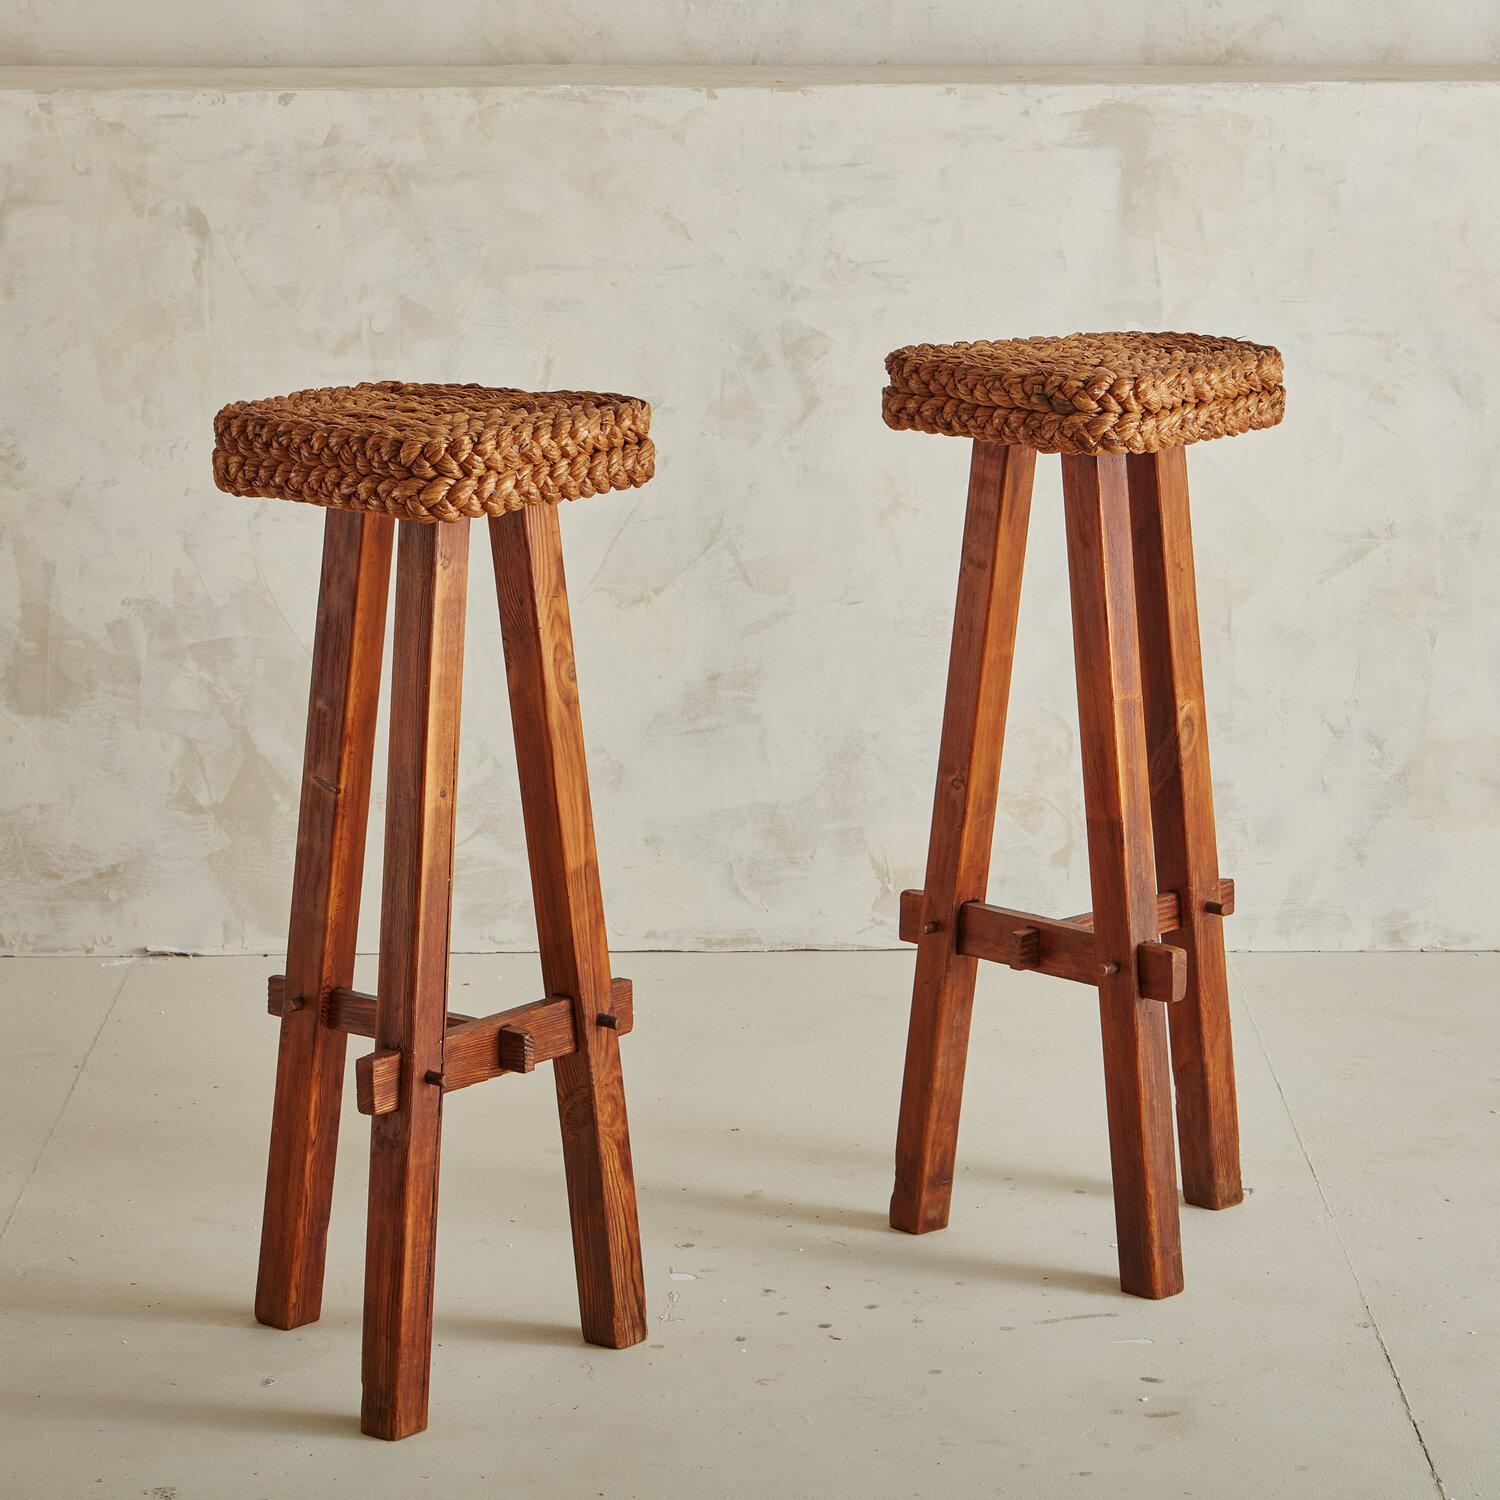 A pair of handsome French 1950s bar stools attributed to and in the likeness of design team, Audoux & Minet. Sourced in France. The seats feature woven abaca rope cord with a tripod stained beech wood base. 

Audoux and Minet became known for